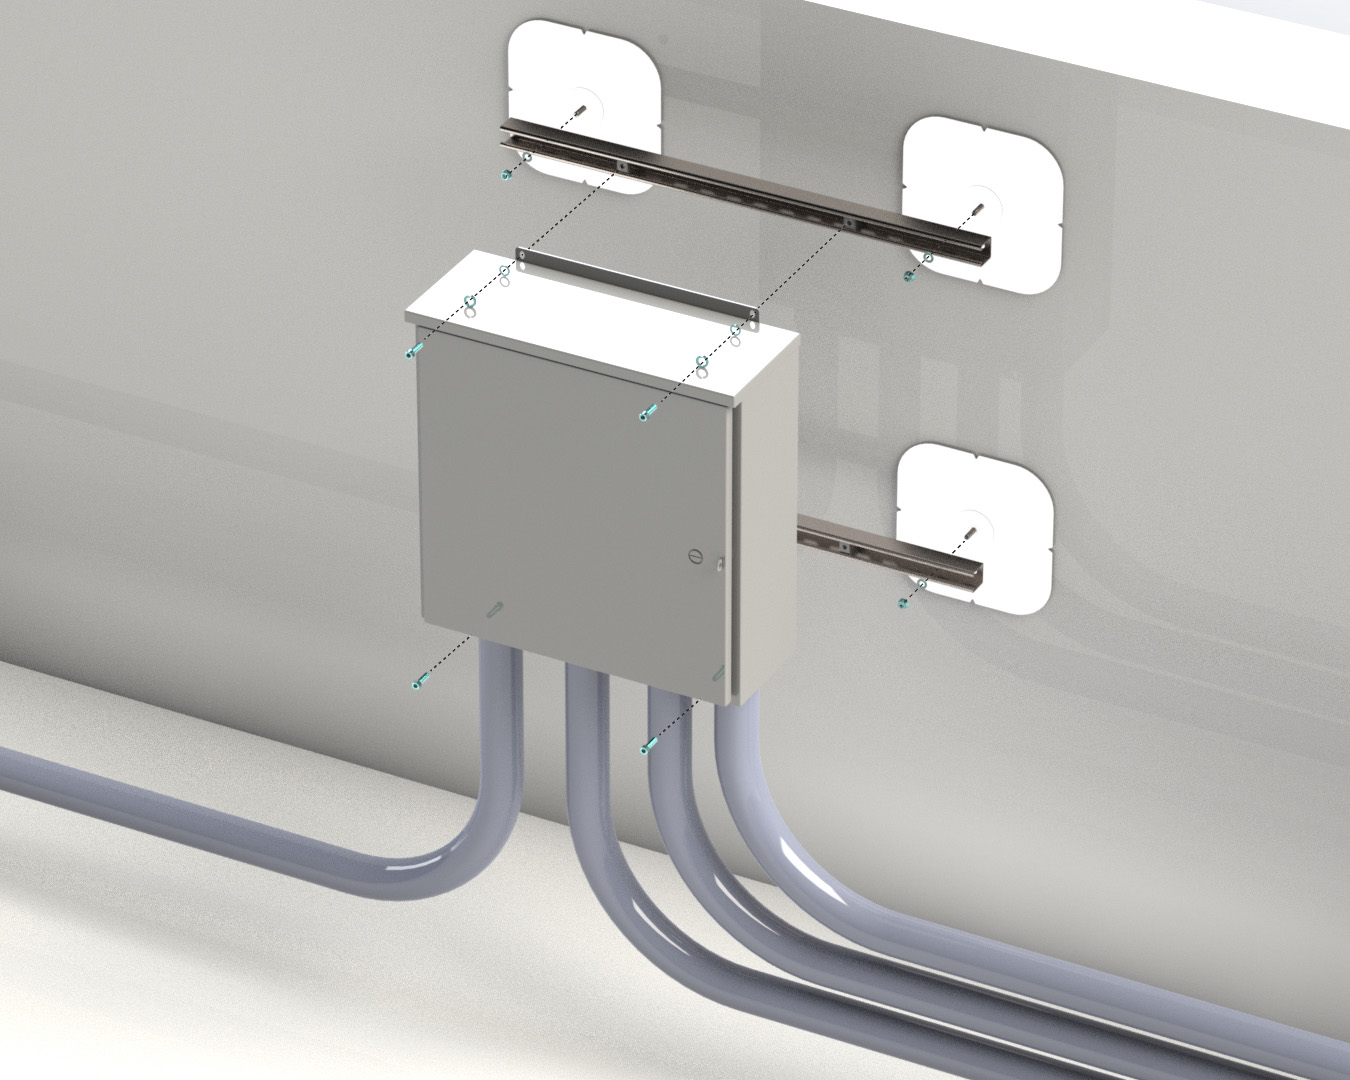 Wall Mounted Box Electrical with conduit Route